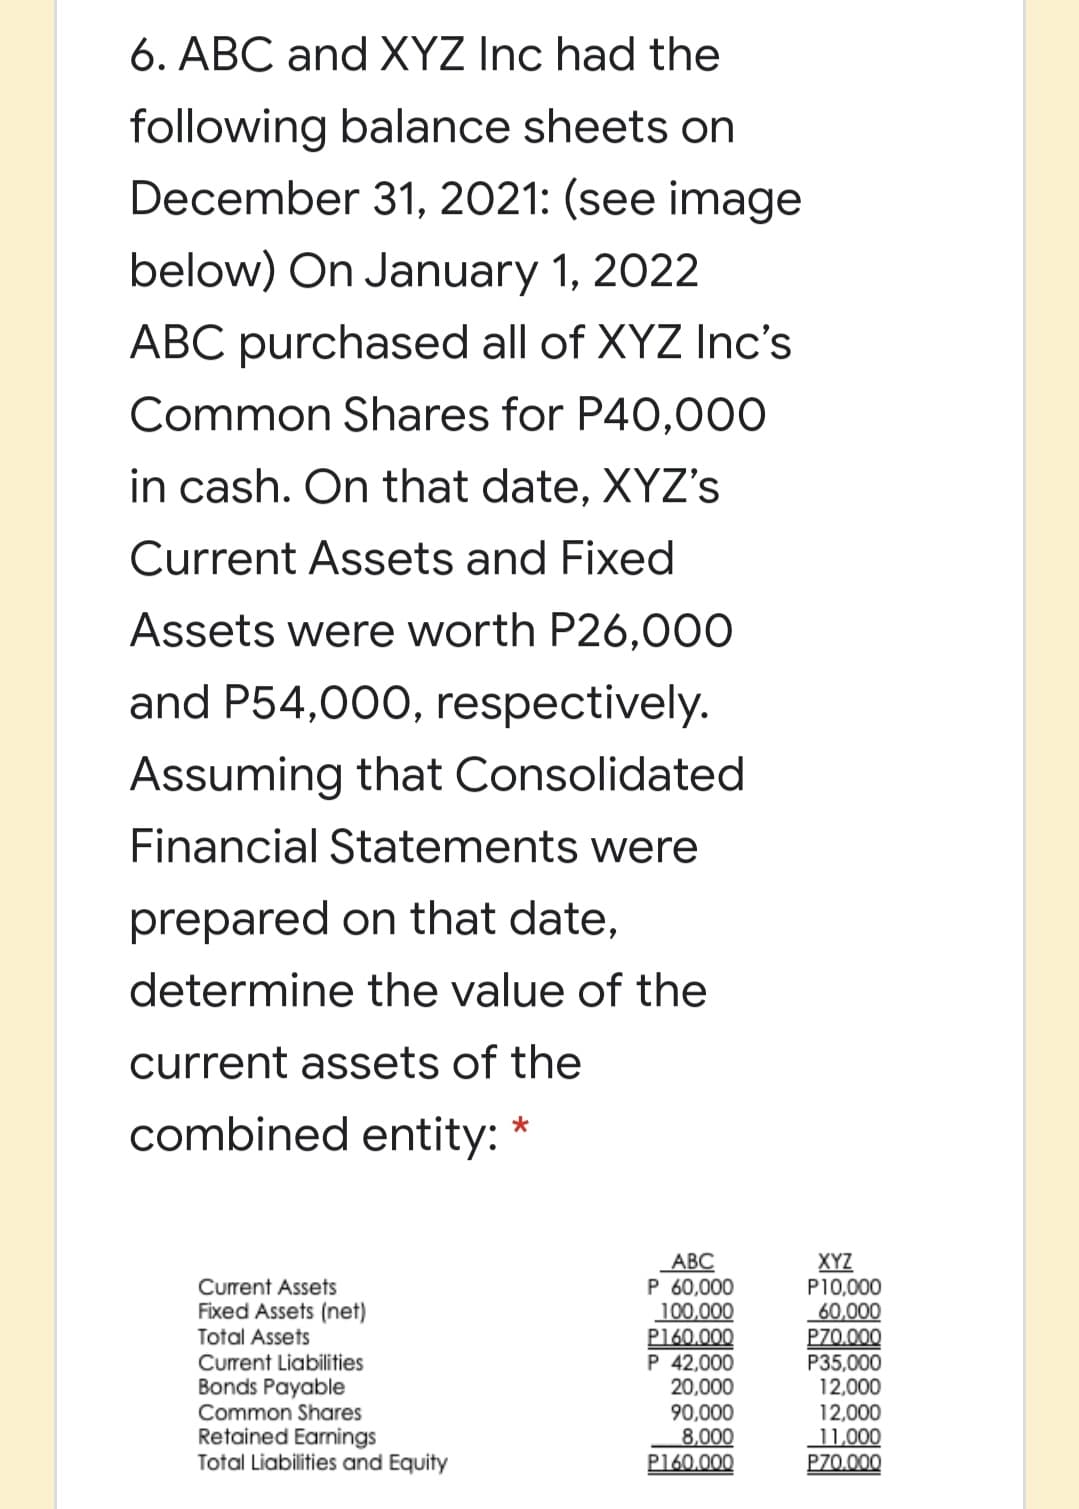 6. ABC and XYZ Inc had the
following balance sheets on
December 31, 2021: (see image
below) On January 1, 2022
ABC purchased all of XYZ Inc's
Common Shares for P40,000
in cash. On that date, XYZ's
Current Assets and Fixed
Assets were worth P26,000
and P54,000, respectively.
Assuming that Consolidated
Financial Statements were
prepared on that date,
determine the value of the
current assets of the
combined entity: *
ABC
P 60,000
100,000
P160.000
P 42,000
20,000
90,000
8,000
P160.000
XYZ
P10,000
60,000
P70.000
P35,000
12,000
12,000
11,000
P70.000
Curent Assets
Fixed Assets (net)
Total Assets
Current Liabilities
Bonds Payable
Common Shares
Retained Earnings
Total Liabilities and Equity
